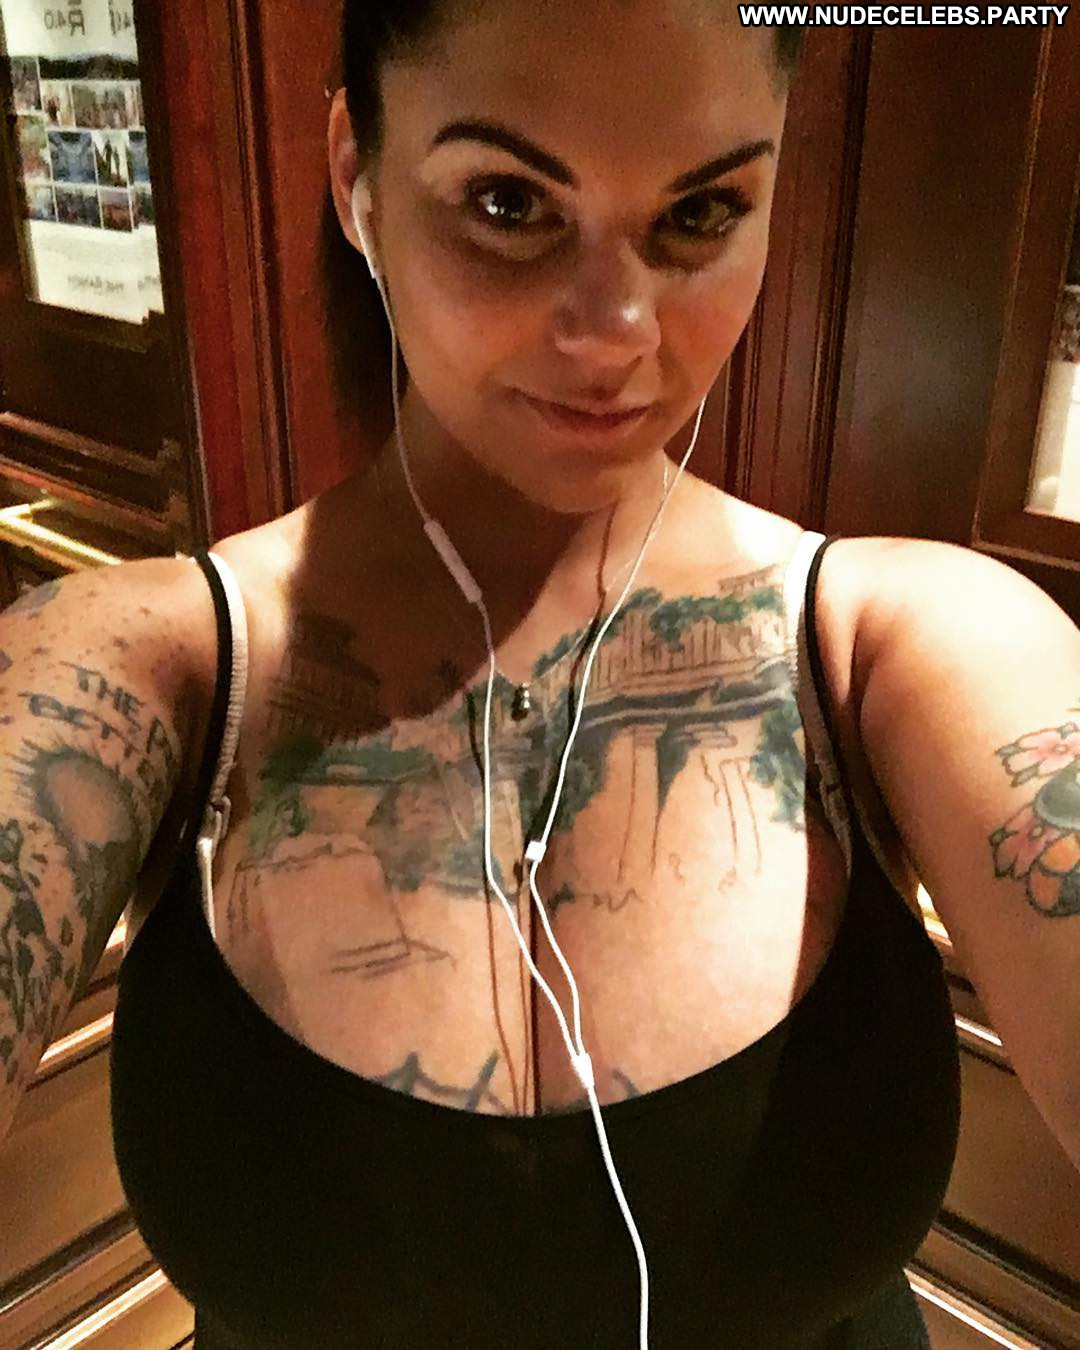 Bonnie Rotten Nude Babe Boobs Actress Celebrity Sexy American Posing Hot Tattoos Beautiful Model Fetish Snapchat pic